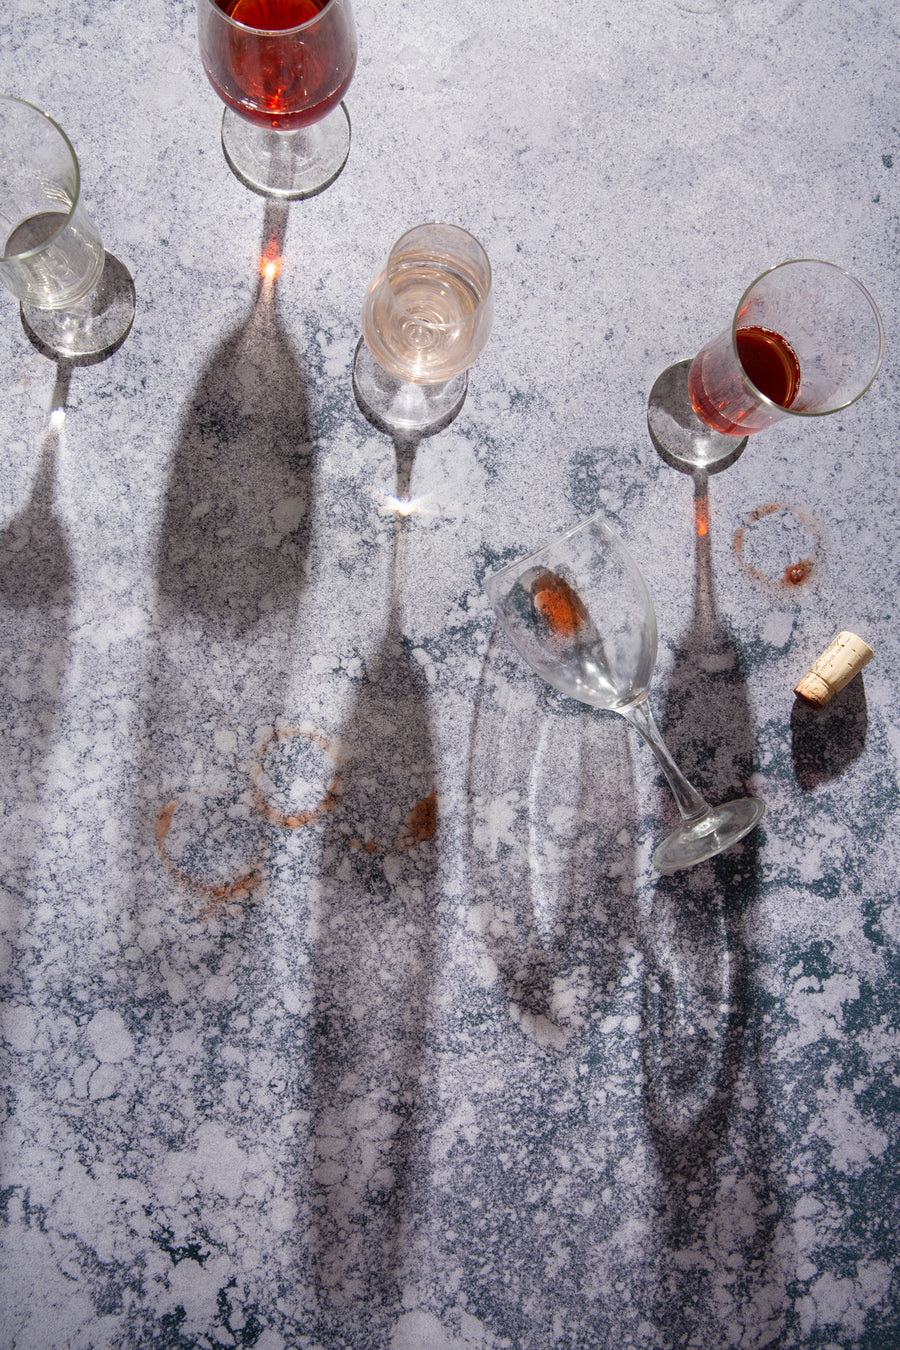 Raven Food Photography Background with used wine glasses